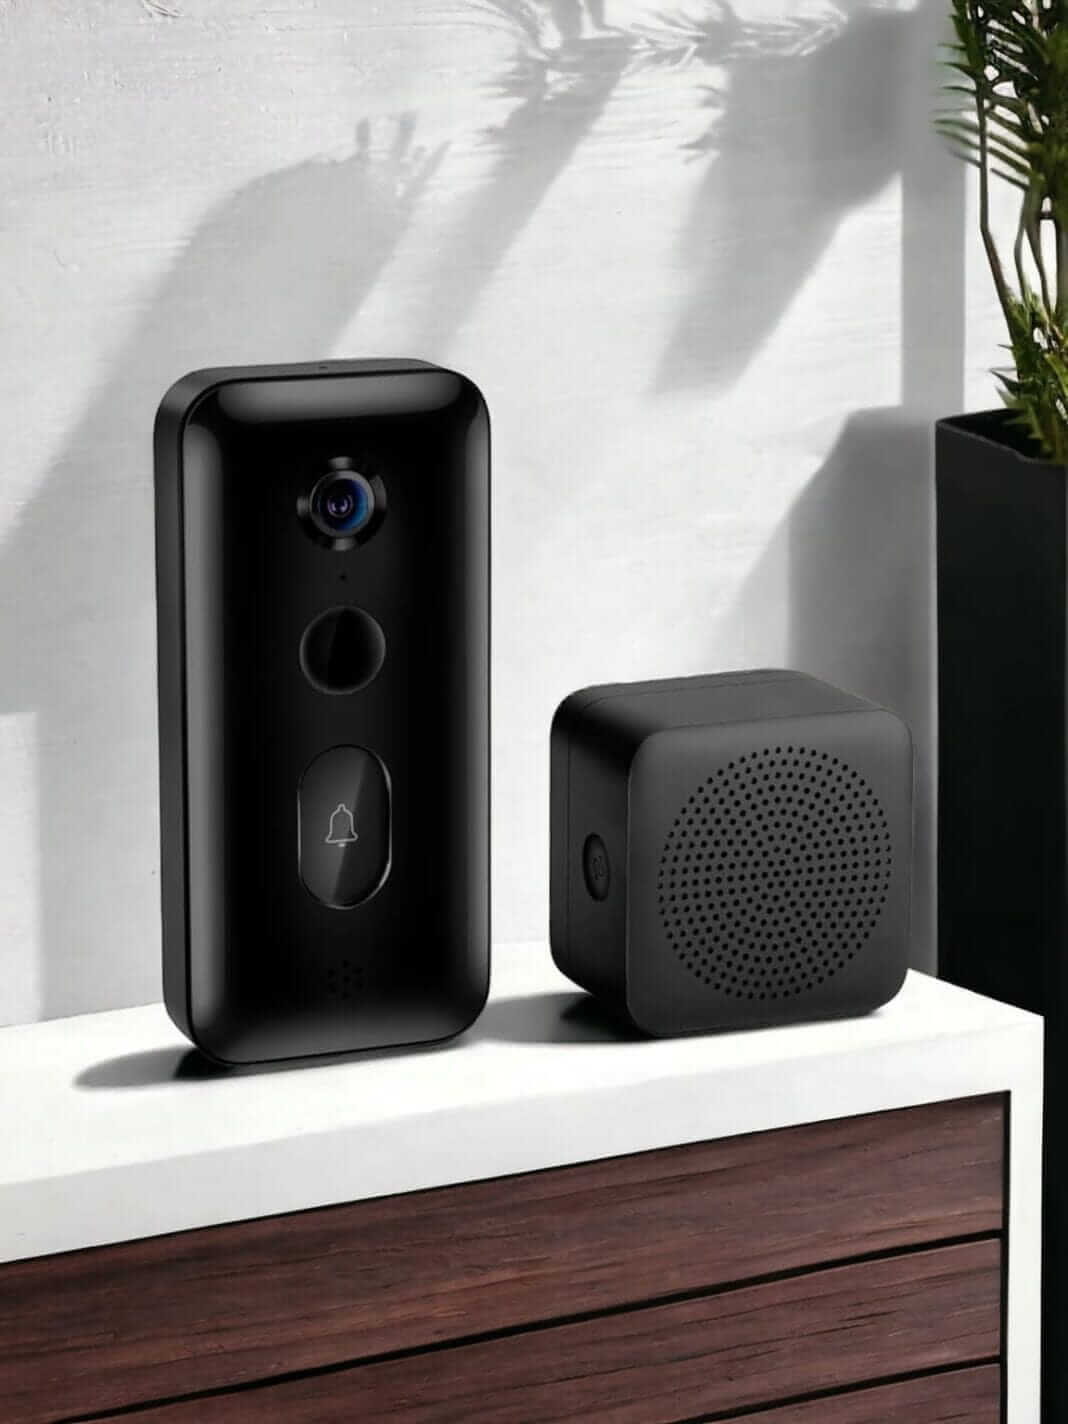 Check out the Xiaomi smart doorbell 3 review featuring a smart home speaker and a compact speaker.